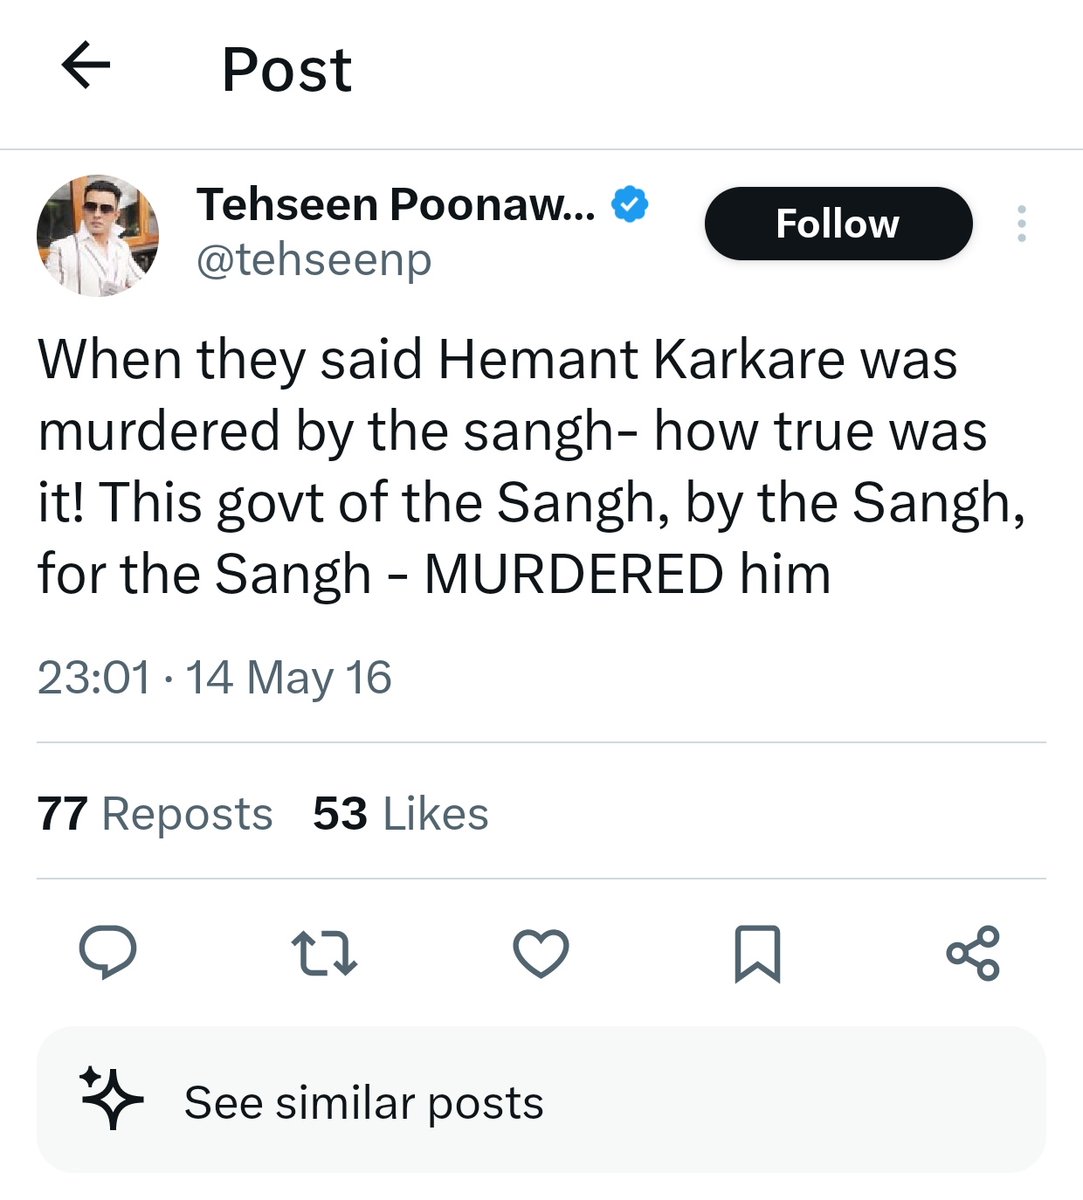 Tweet on Hemant Karkere deleted by @tehseenp. But after 8 years?